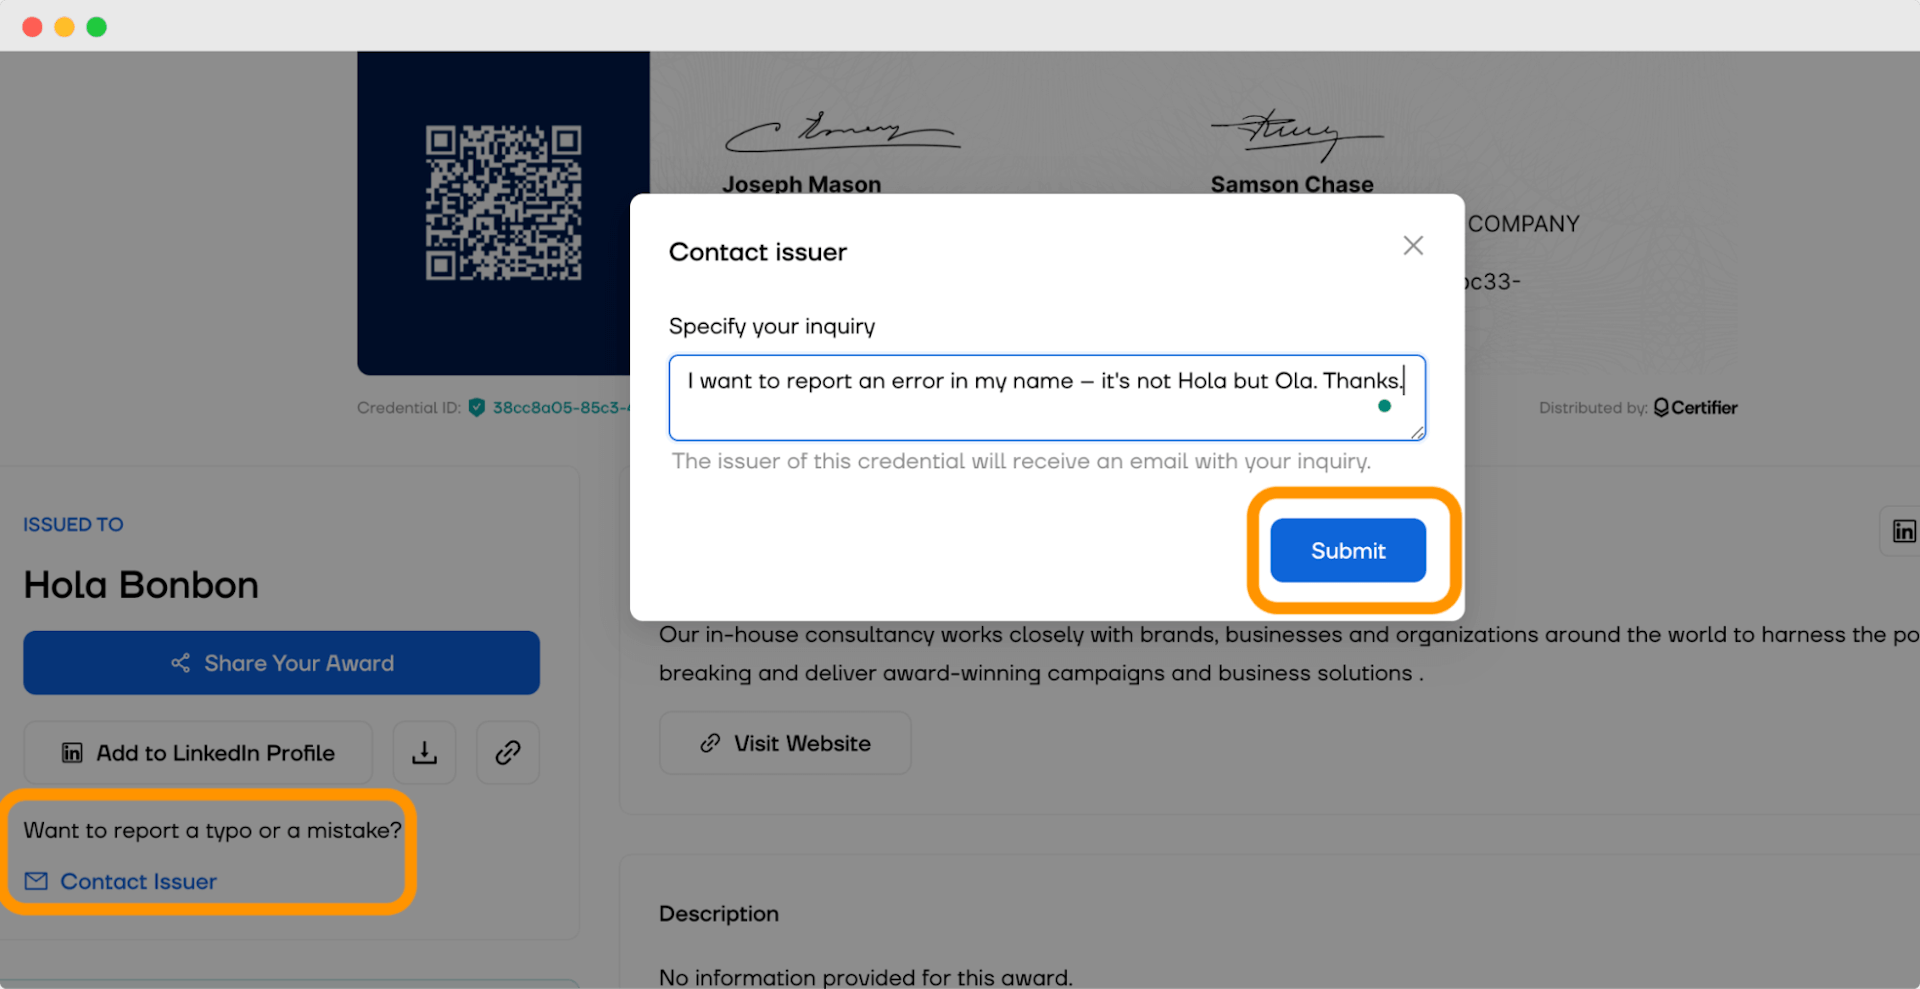 Reporting a problem with digital credential within the Certifier digital wallet.